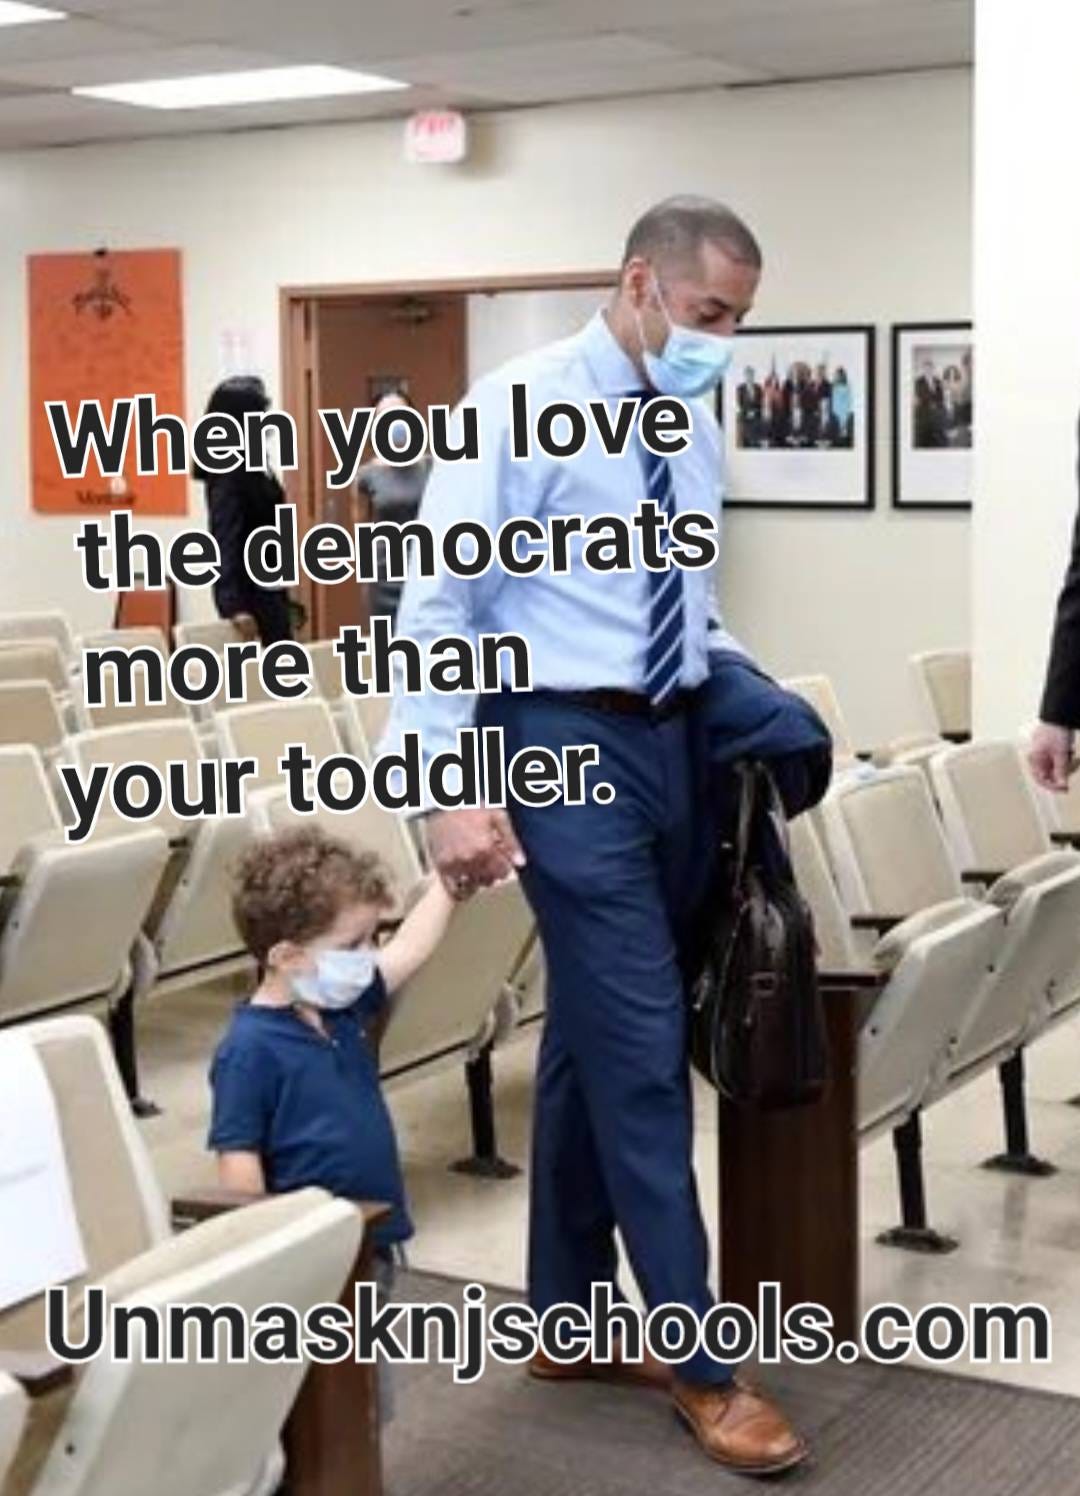 May be an image of 3 people and text that says 'When you love the democrats more than your toddler. Unmasknjschools.com'